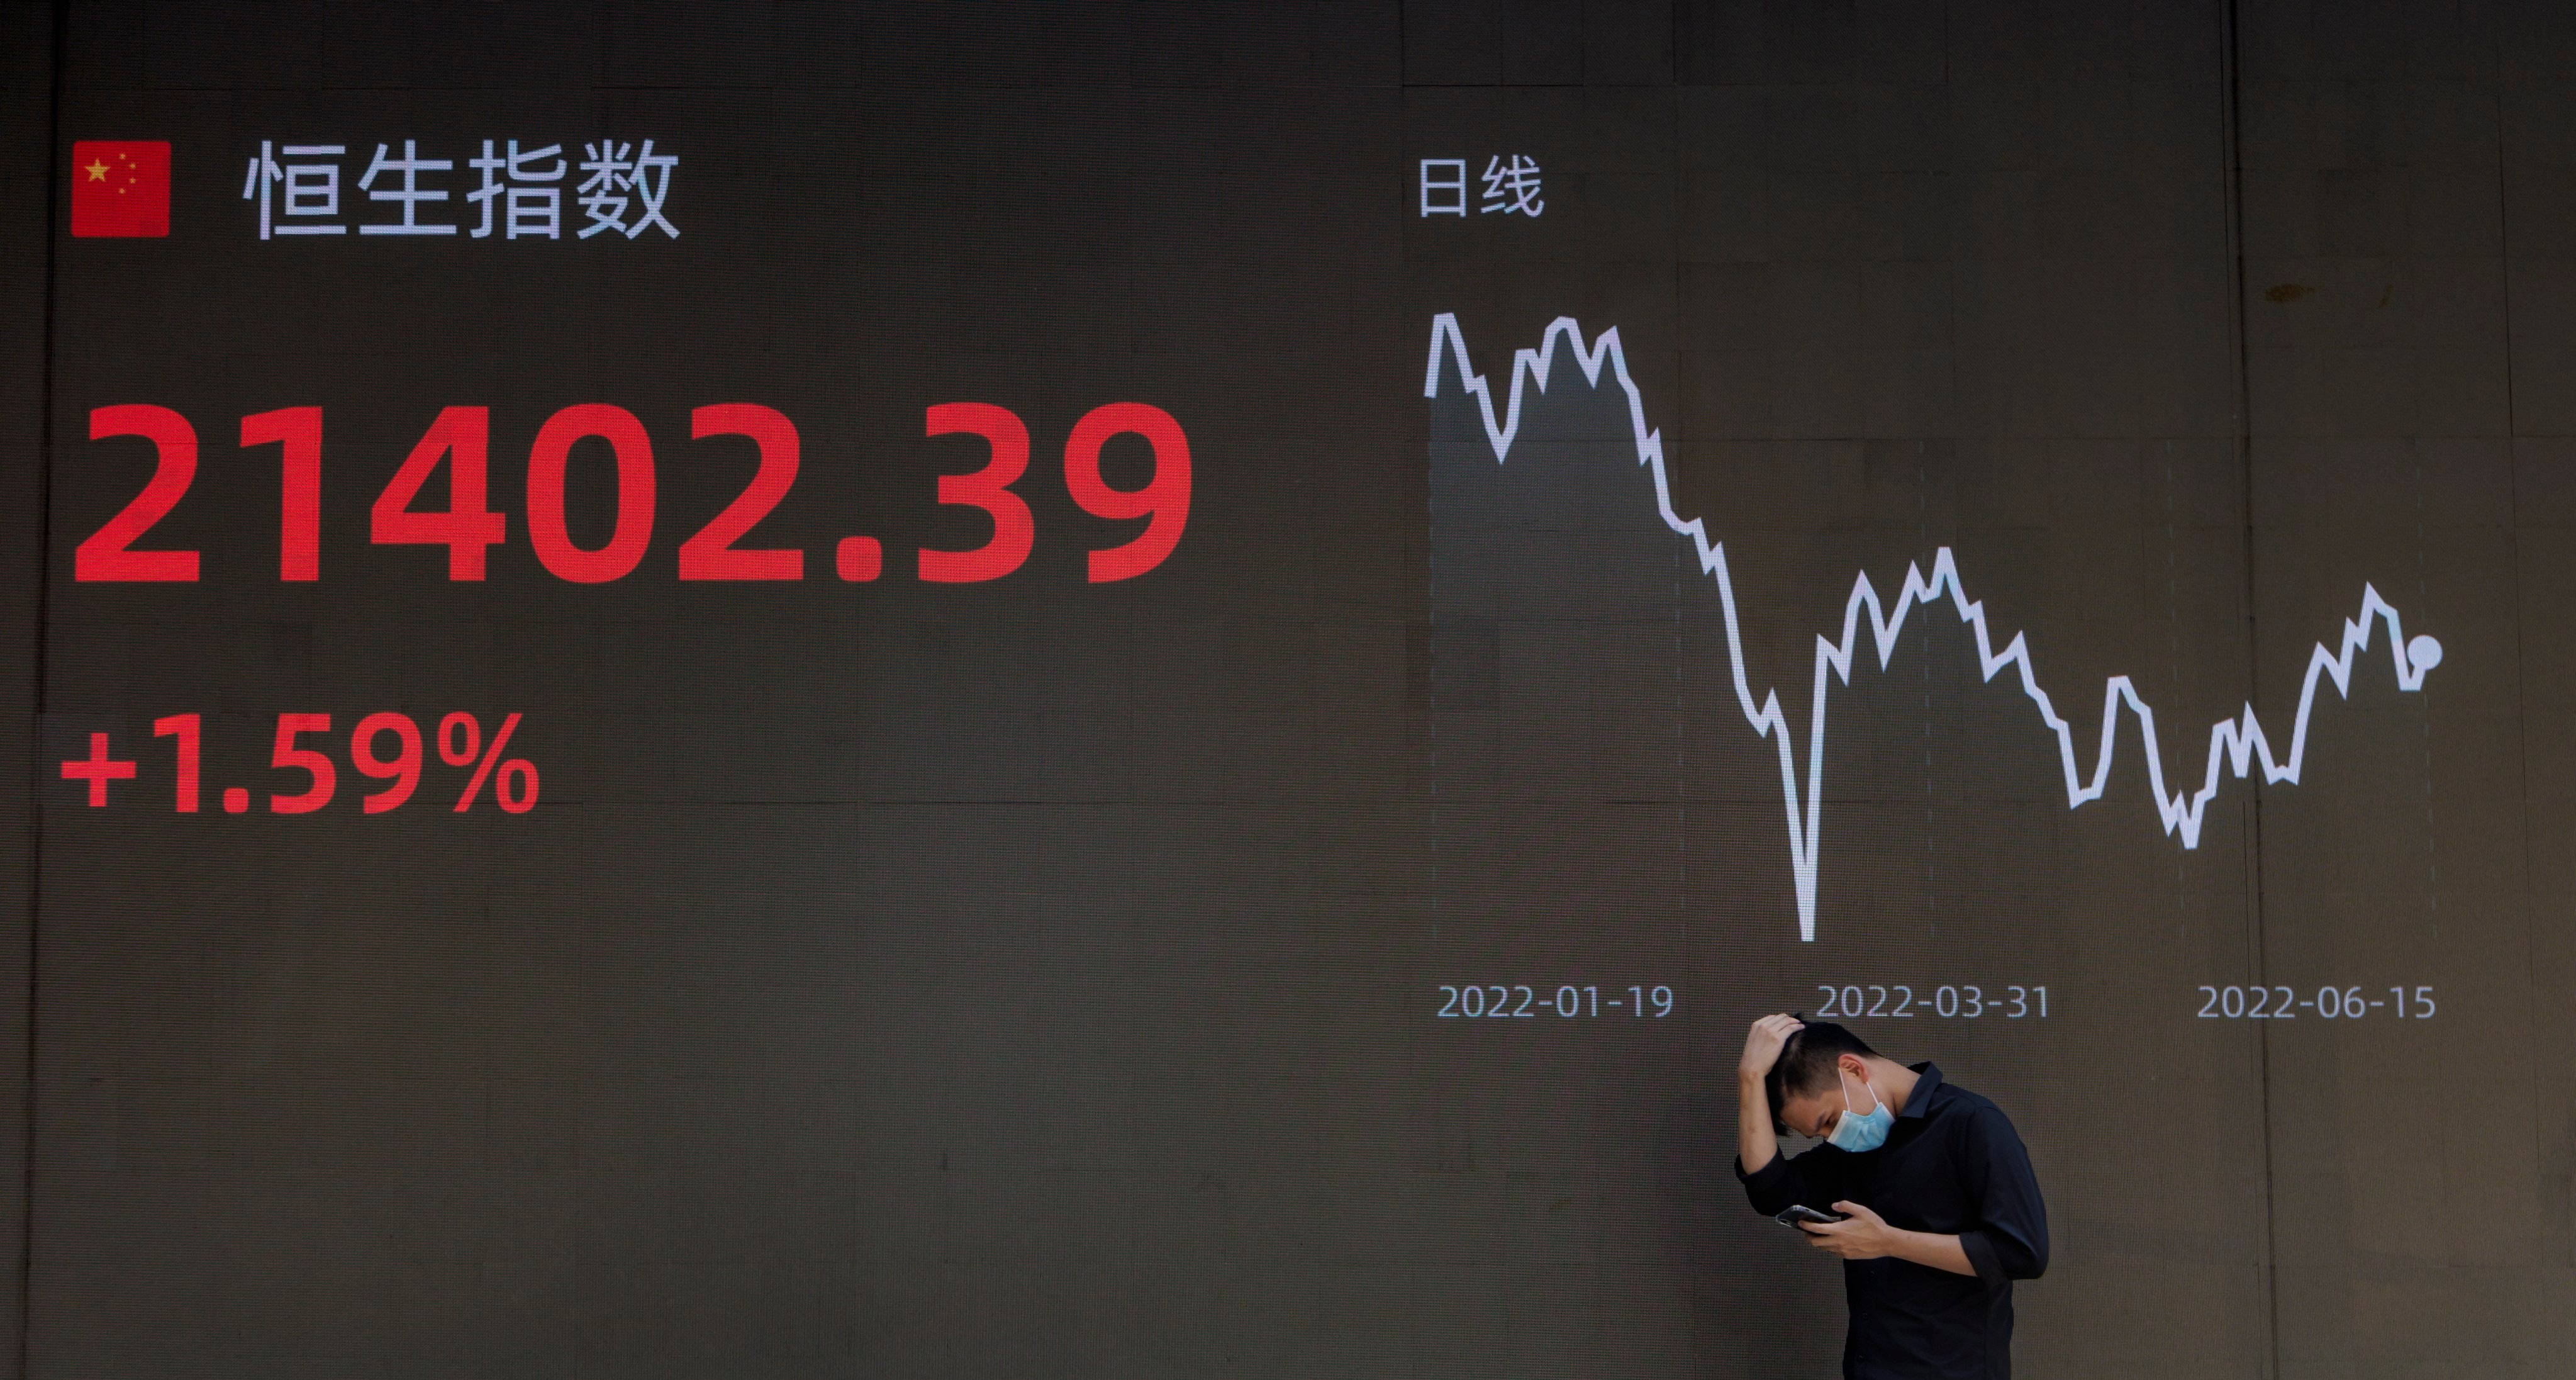 A man stands in front of a screen showing the latest economy and stock exchange updates in Shanghai on June 15. The past year has been nearly a perfect storm for China and other Asian economies, but shifting winds could turn in their favour in 2023. Photo: EPA-EFE